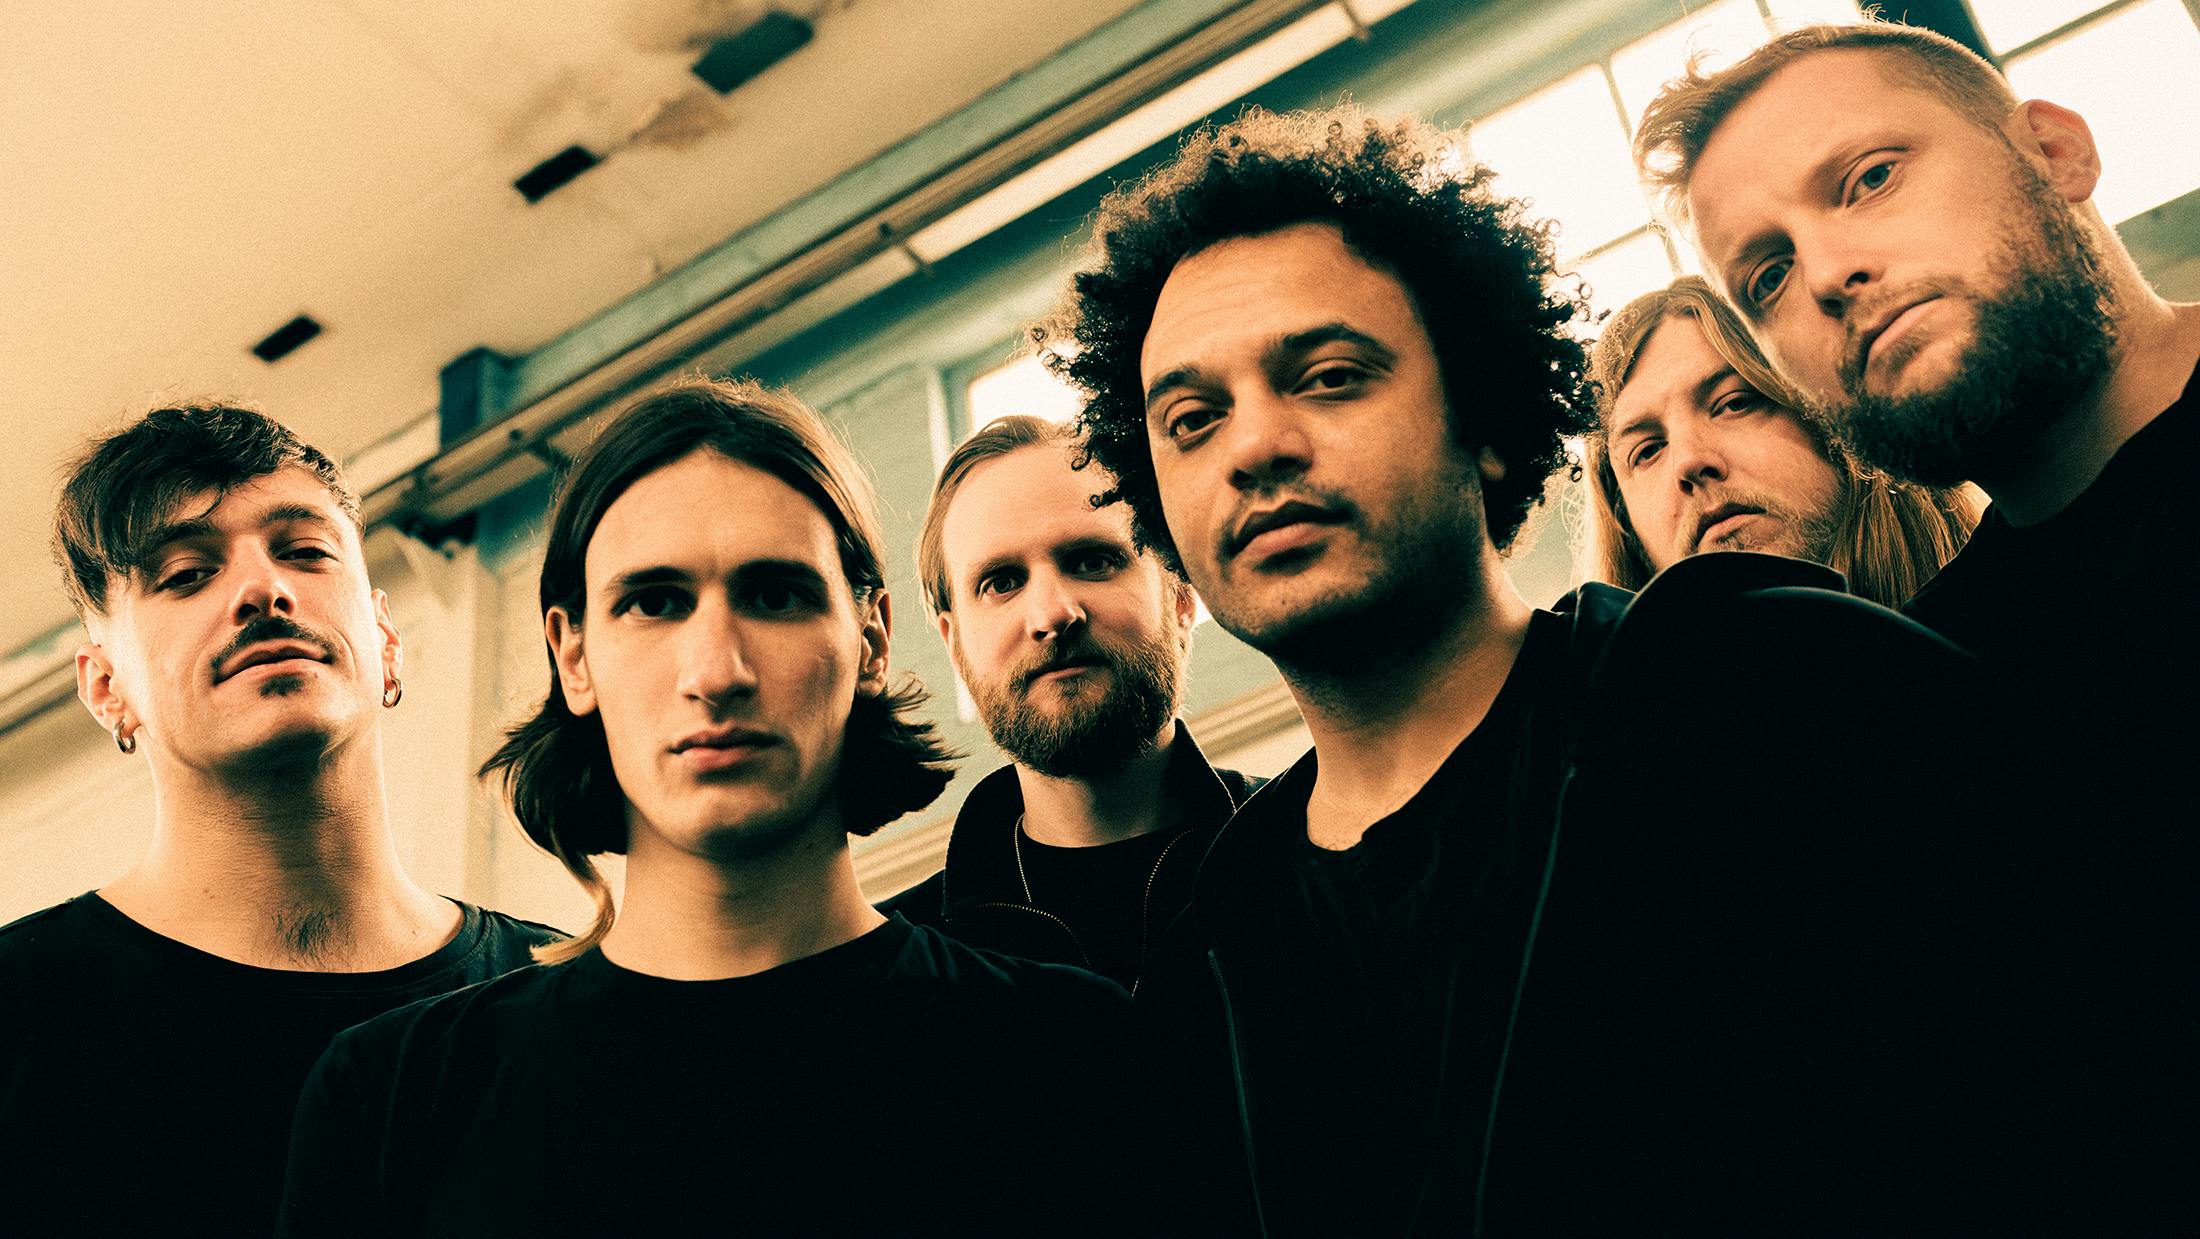 Zeal & Ardor: “The more music we put into this world, the more obvious it becomes who we really are”